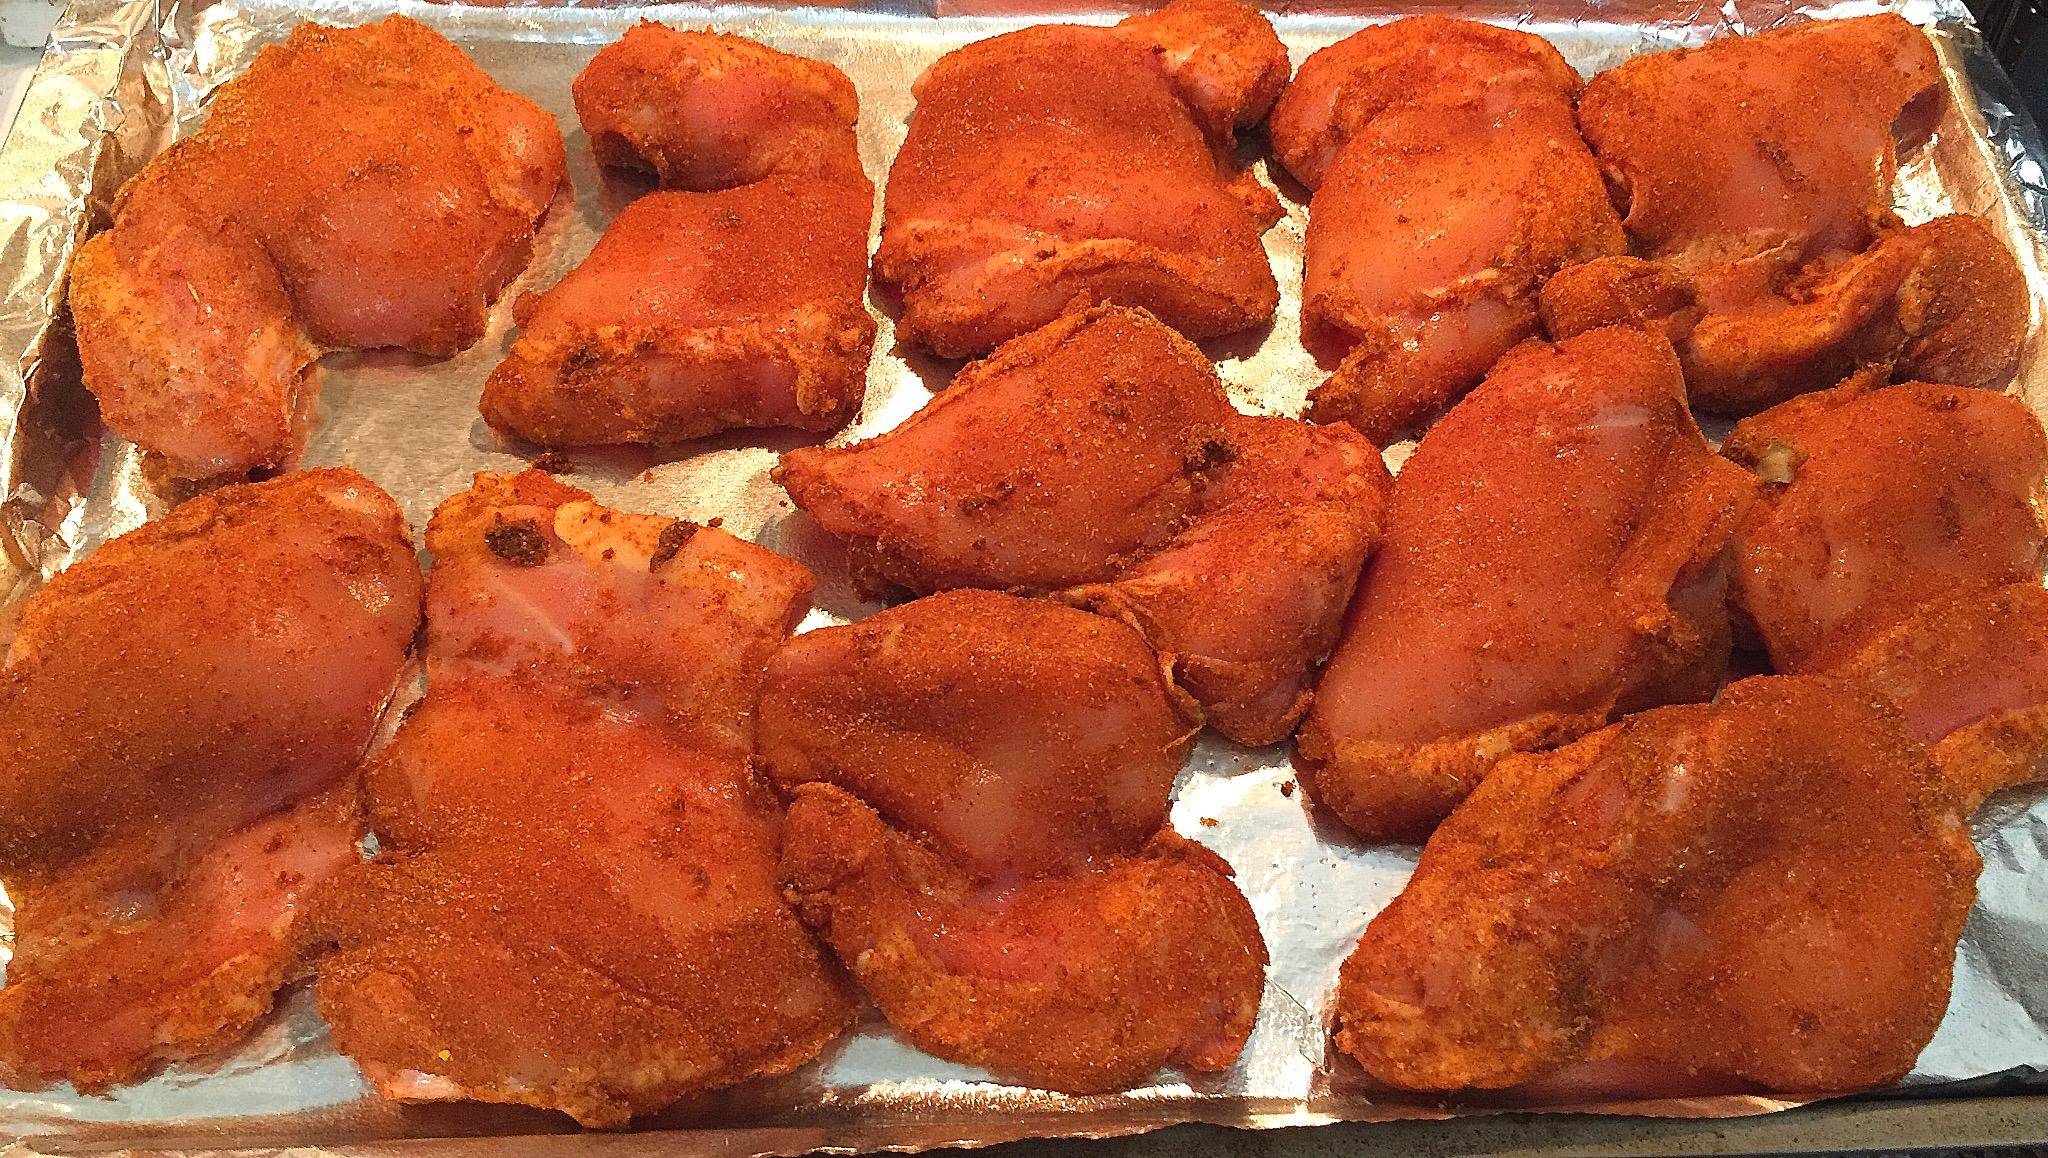 Chicken thighs coated with Indian spice rub